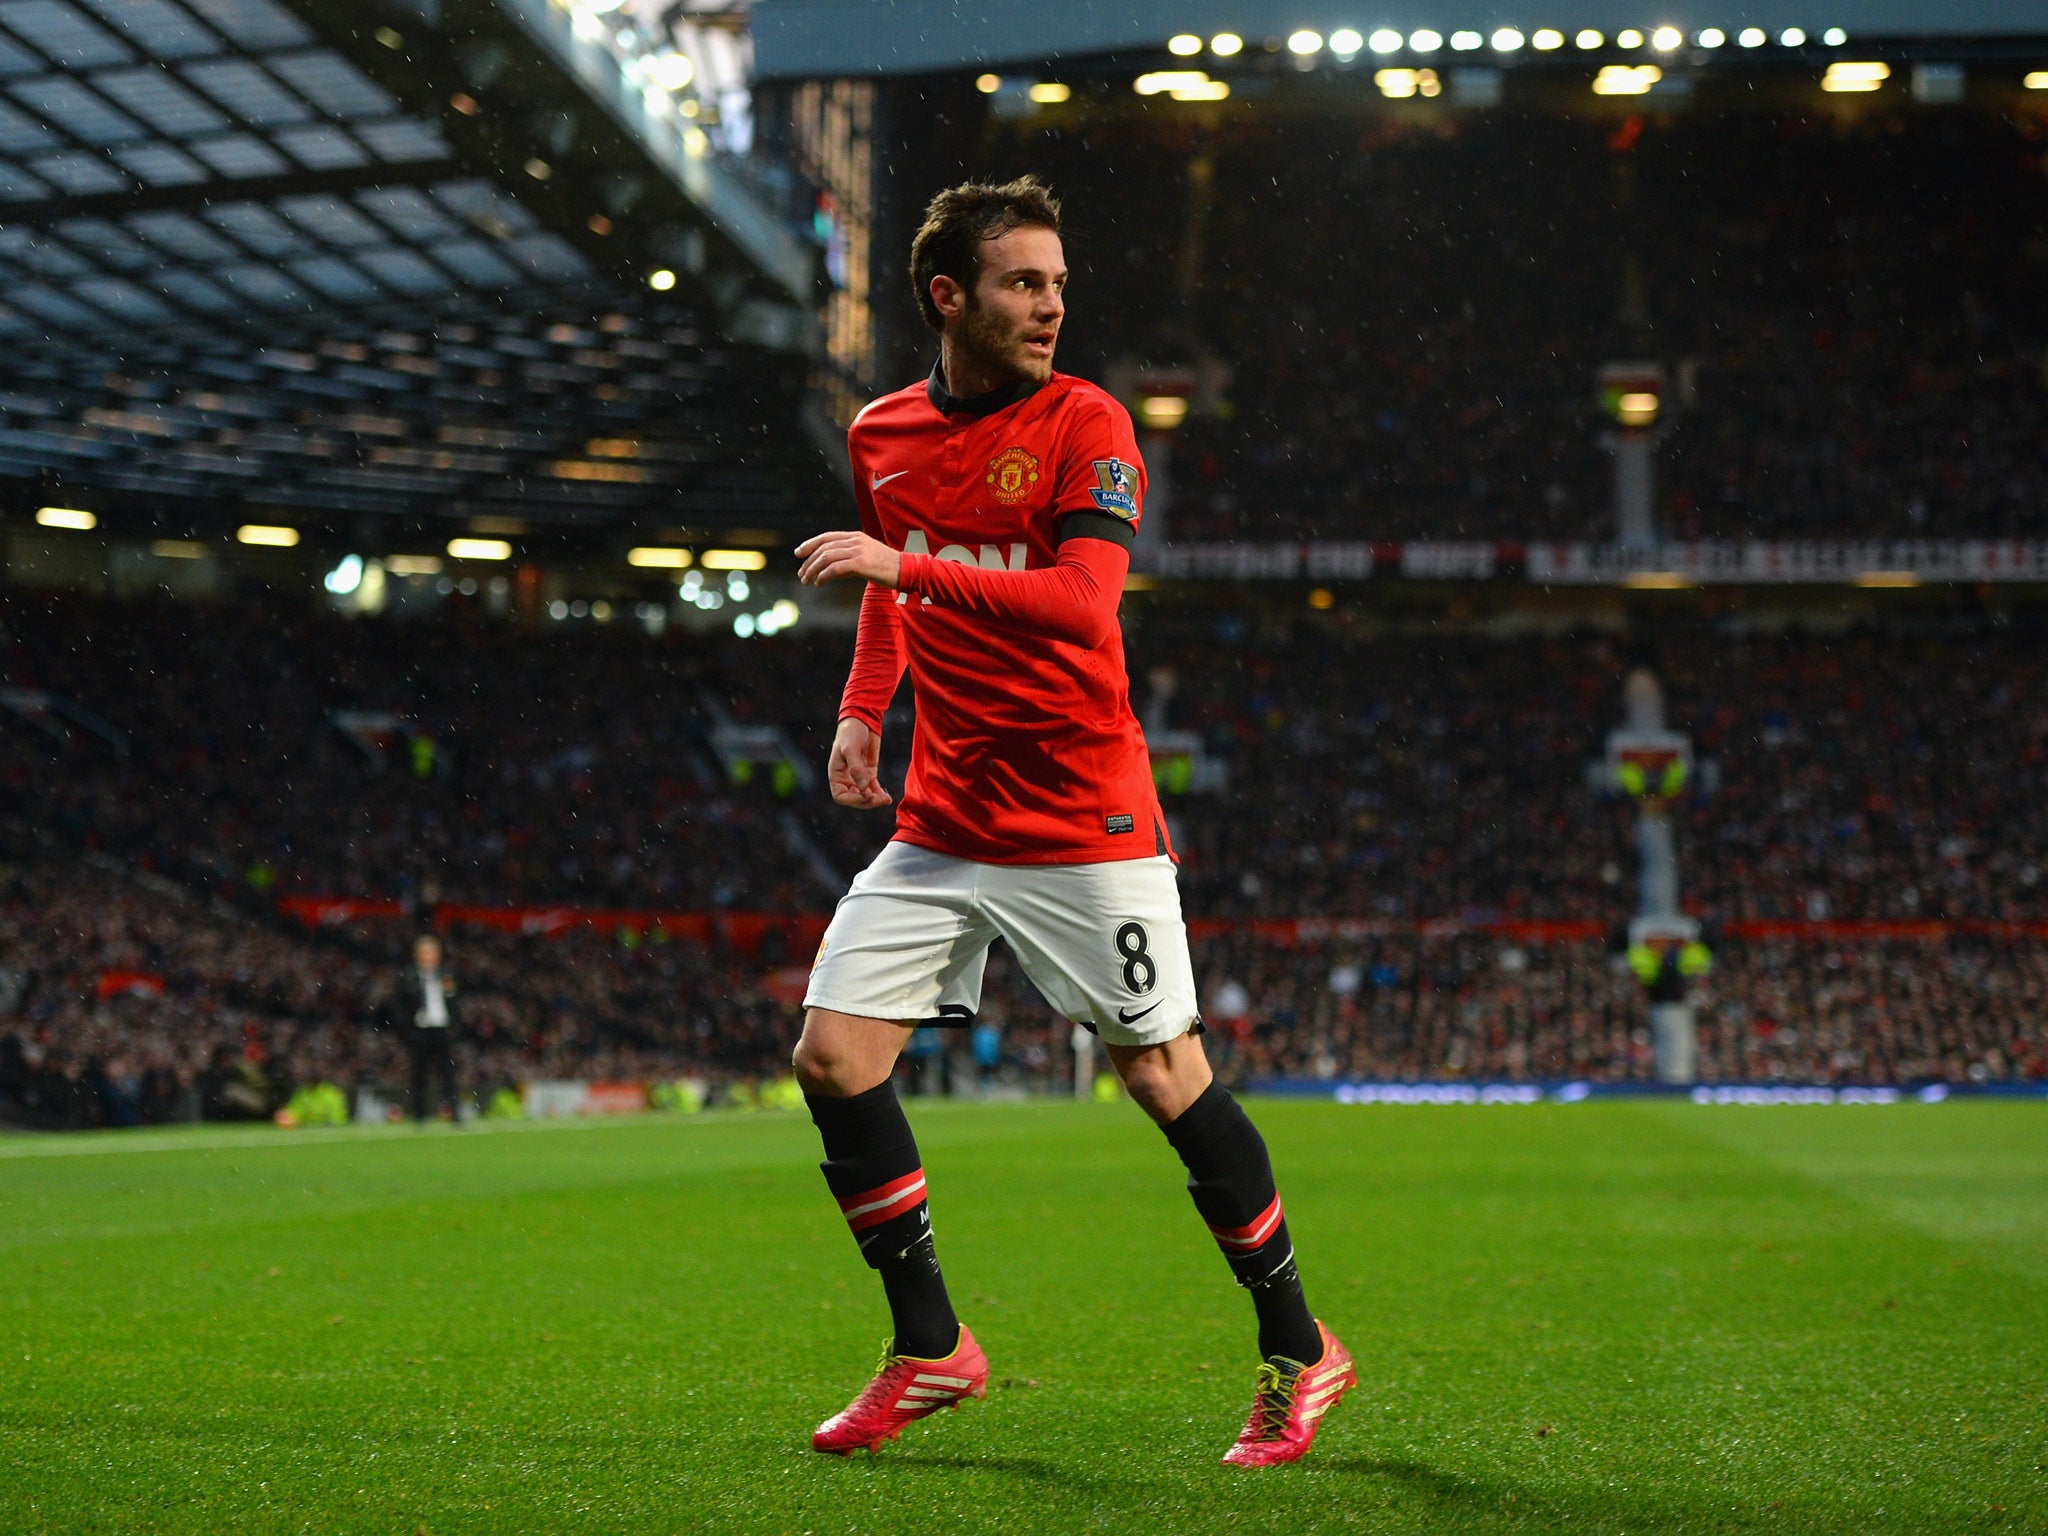 The £37m paid for Juan Mata in January was a club record